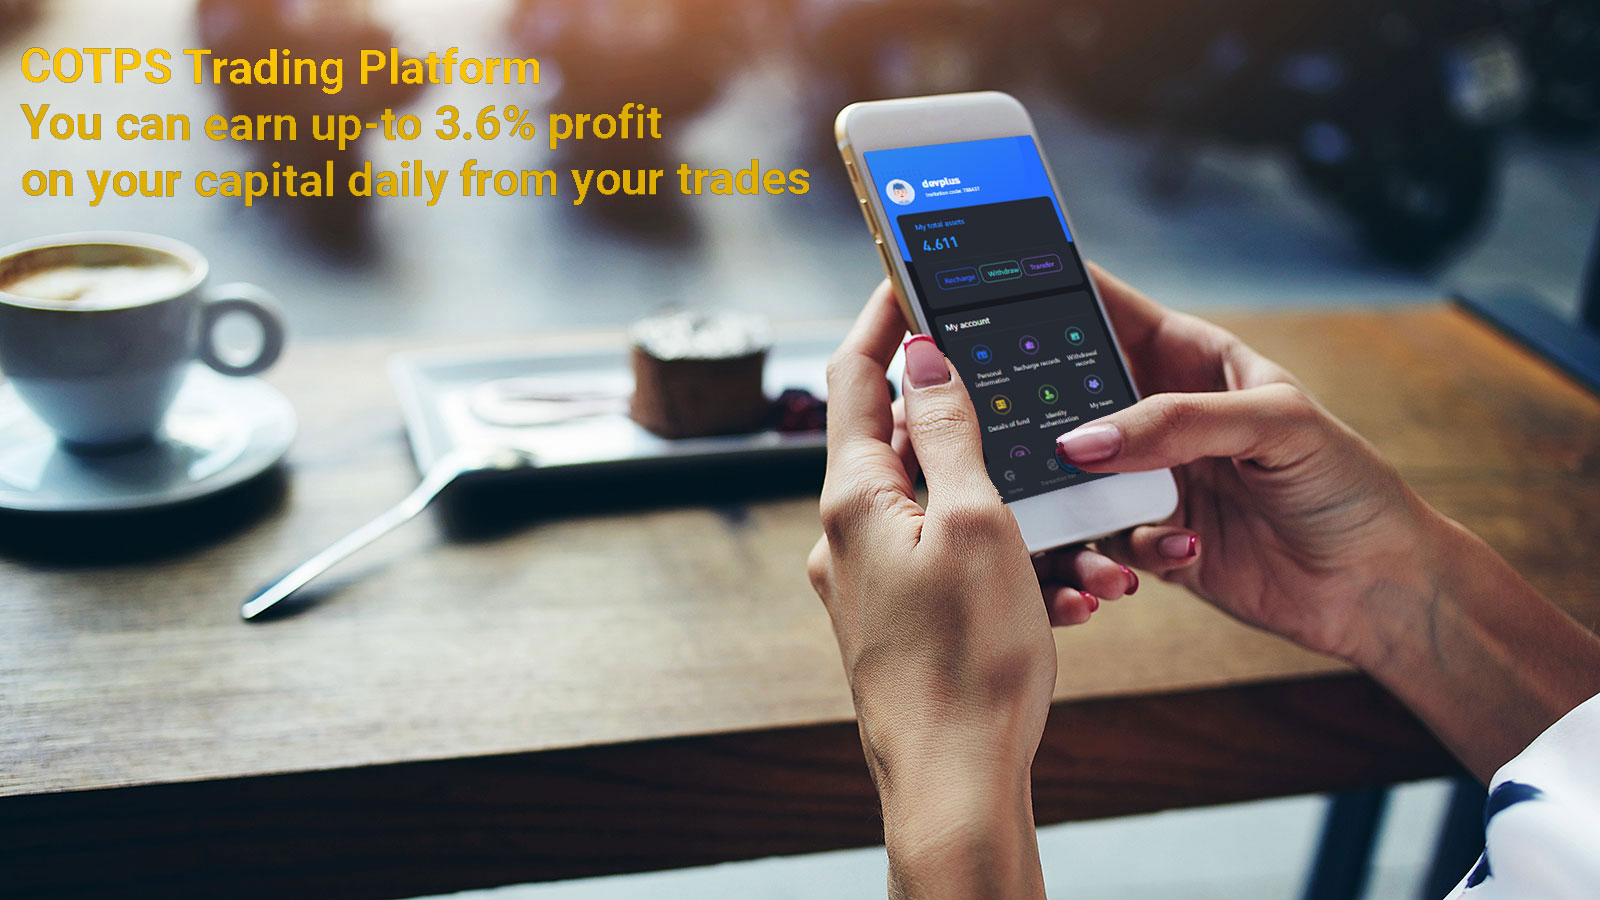 Invest in cotps and earn up-to 3.6% profit on your capital daily from your trades!